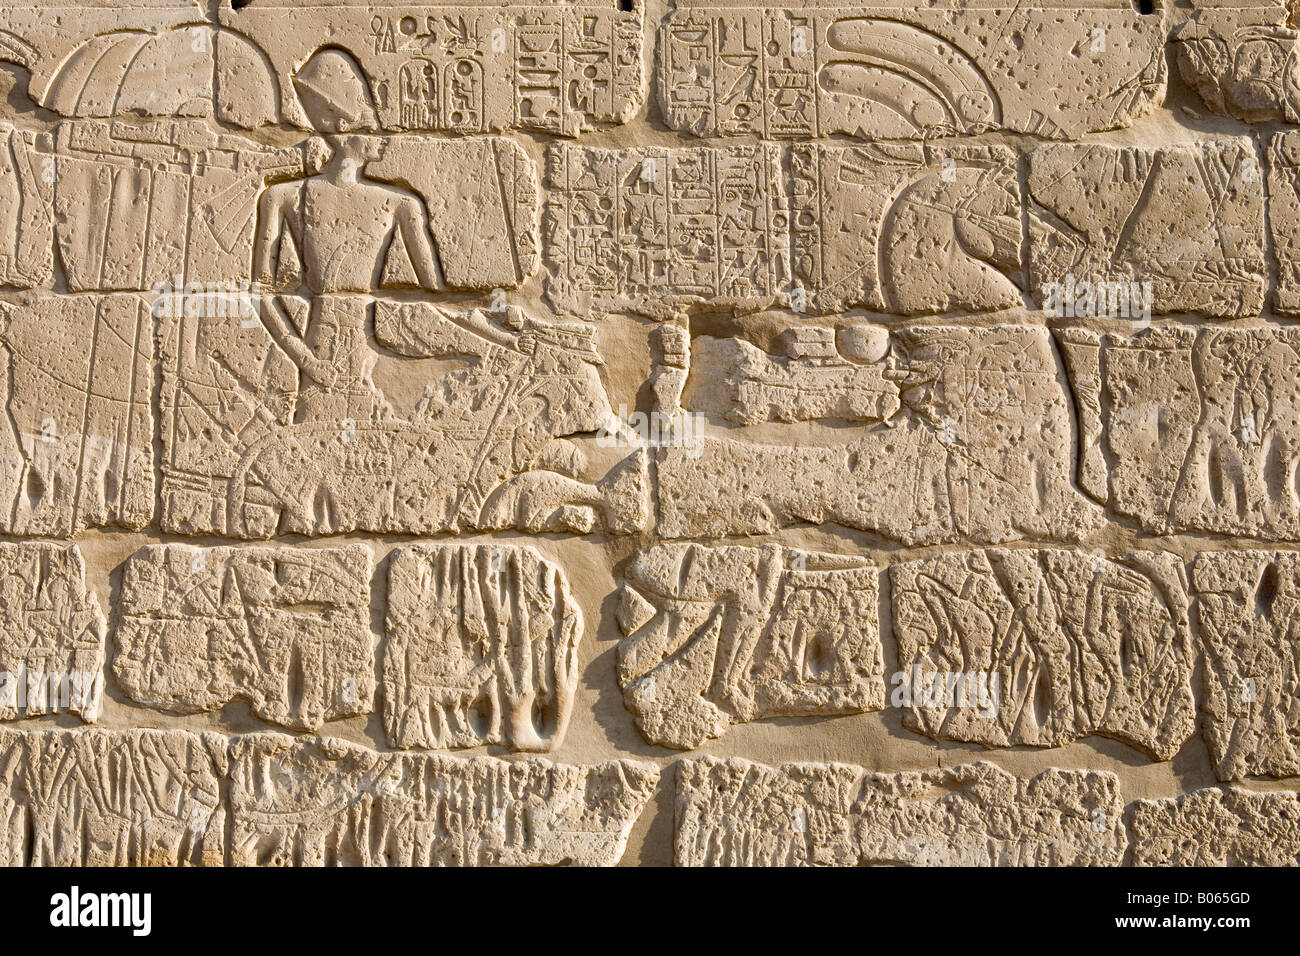 Carved relief wall at Luxor Temple Egypt Stock Photo